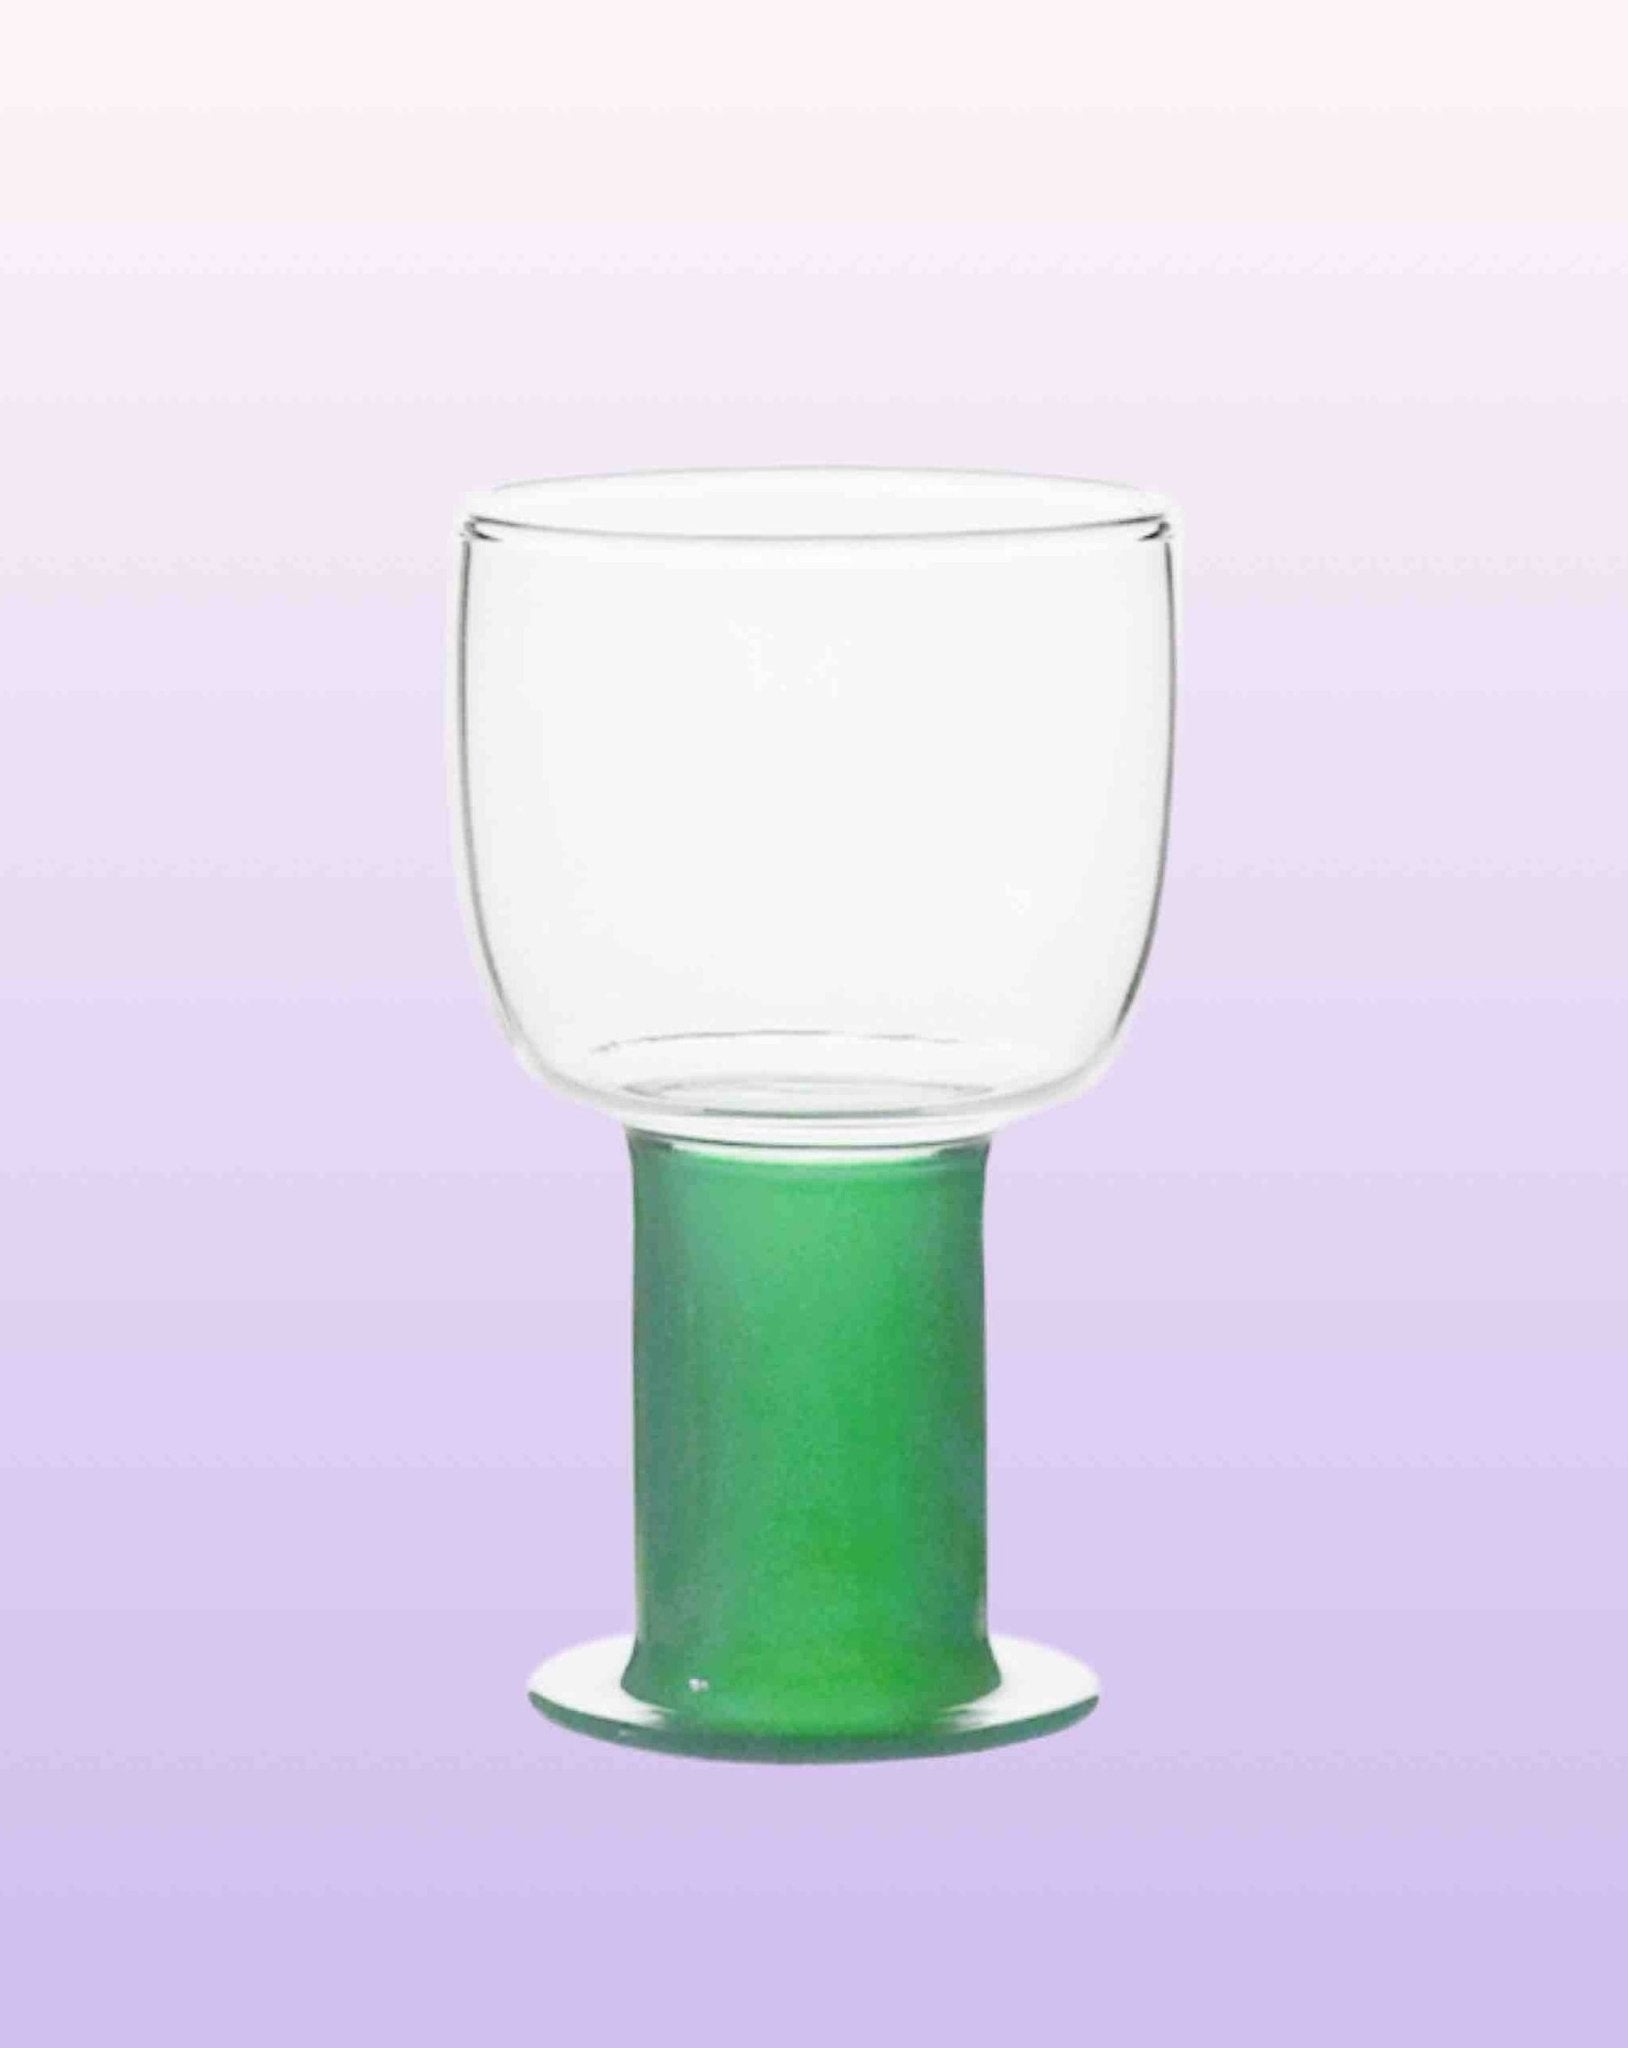 Handblown Chubby Colored Wine Glasses Set - Chubby Glassware - Mint Set of 2 Pcs - 220ml - INSPECIAL HOME